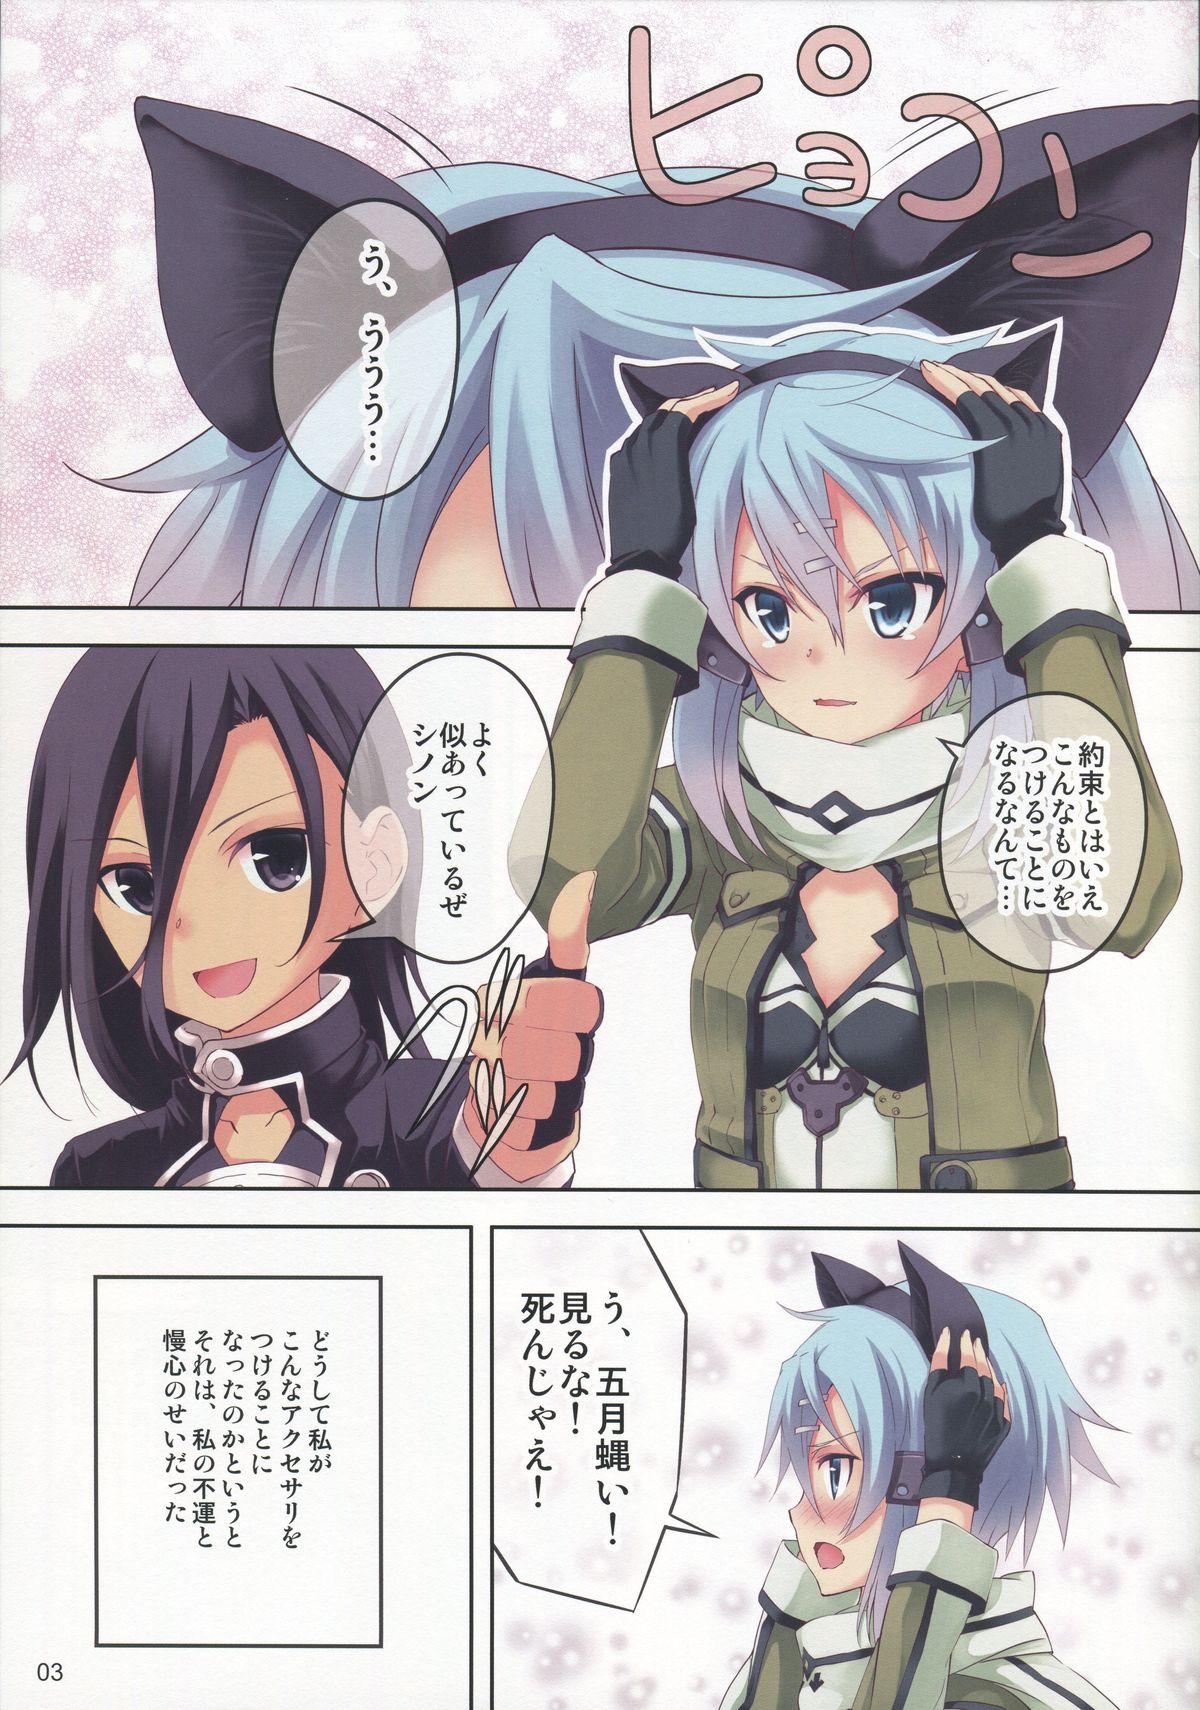 Gaping ULTIMARATIO - Sword art online Free Amature - Page 2